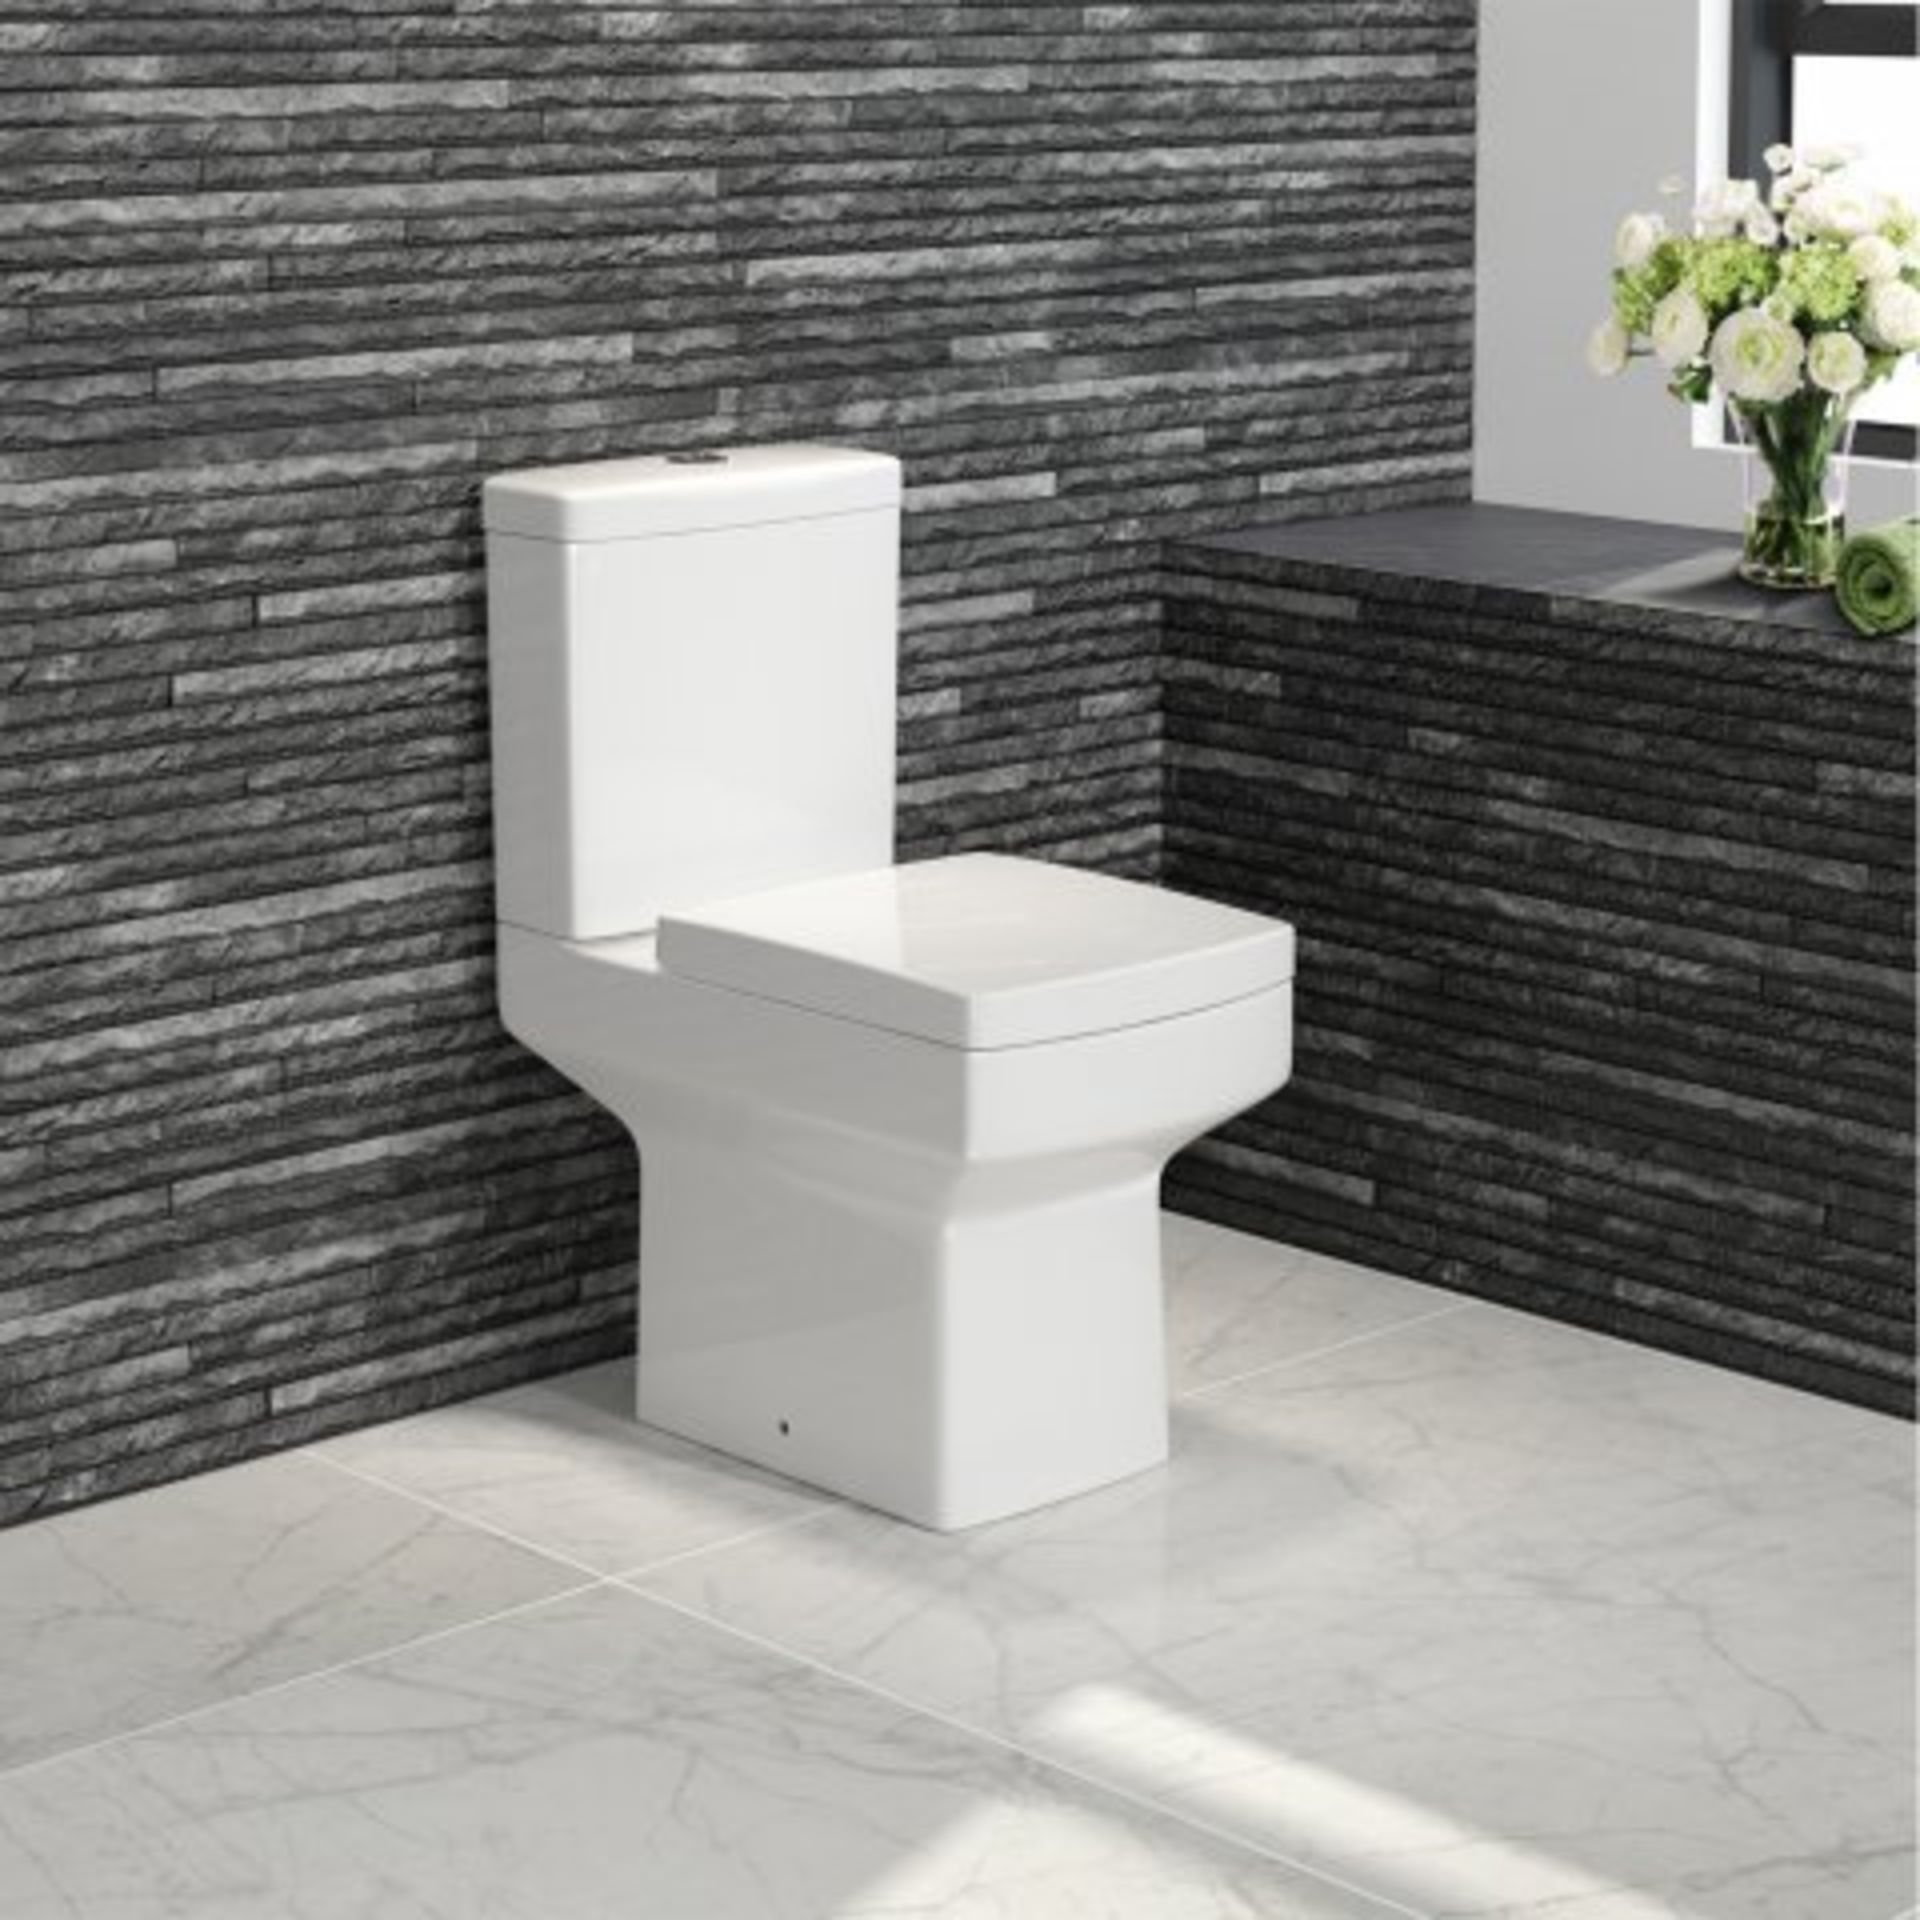 NEW & BOXED Belfort Close Coupled Toilet & Cistern inc Soft Close Seat. RRP £499.99.CC645.Long - Image 2 of 3